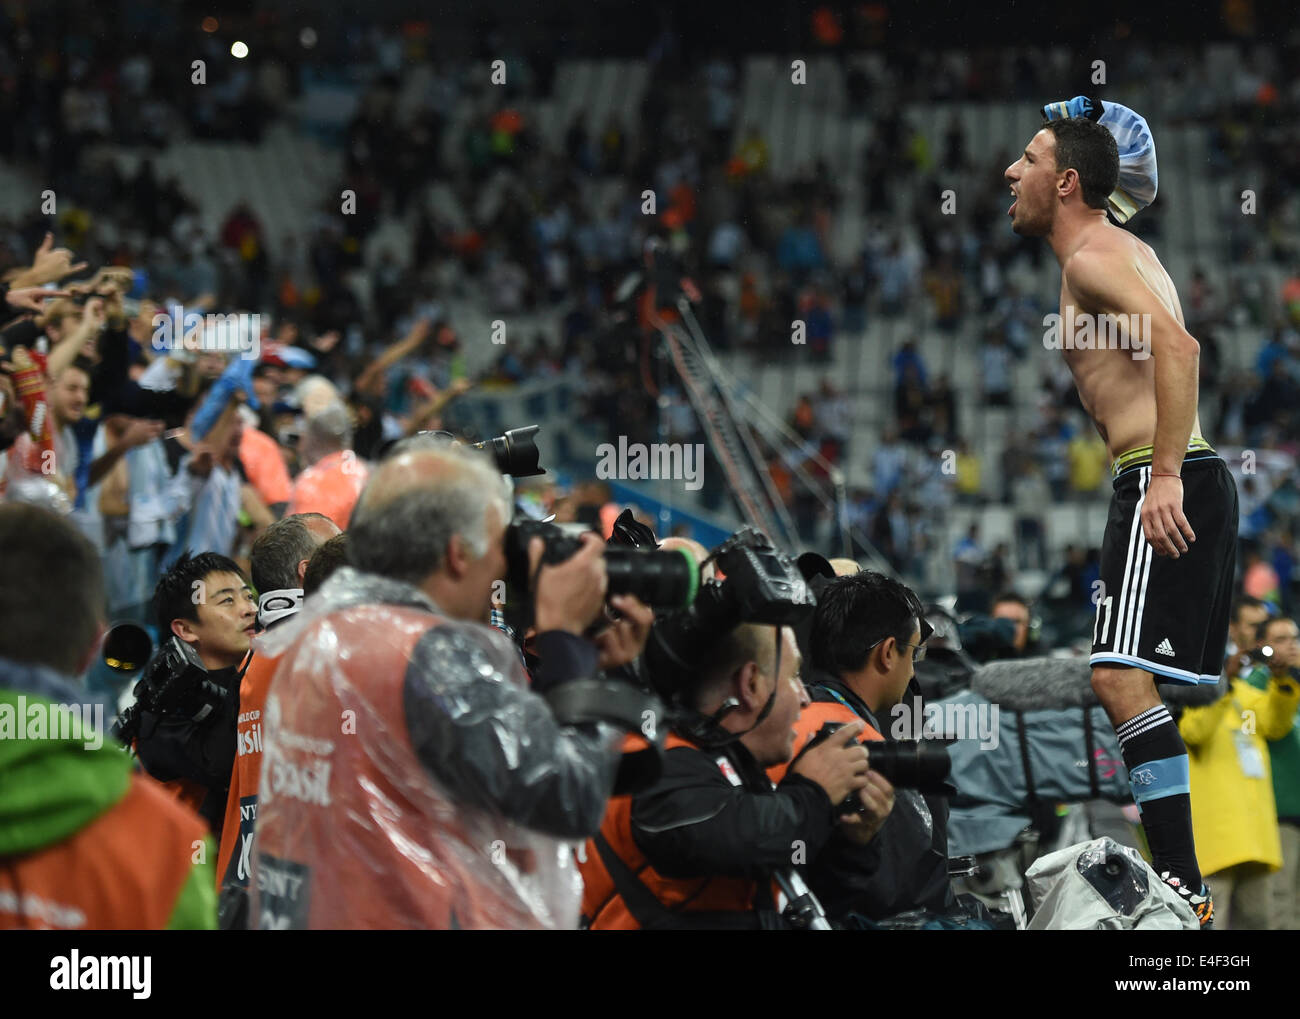 Sao Paulo, Brazil. 09th July, 2014. Argentina's Maxi Rodriguez (R) after winning the penalty shoot-out of the FIFA World Cup 2014 semi-final soccer match between the Netherlands and Argentina at the Arena Corinthians in Sao Paulo, Brazil, 09 July 2014. Photo: Marius Becker/dpa/Alamy Live News Stock Photo